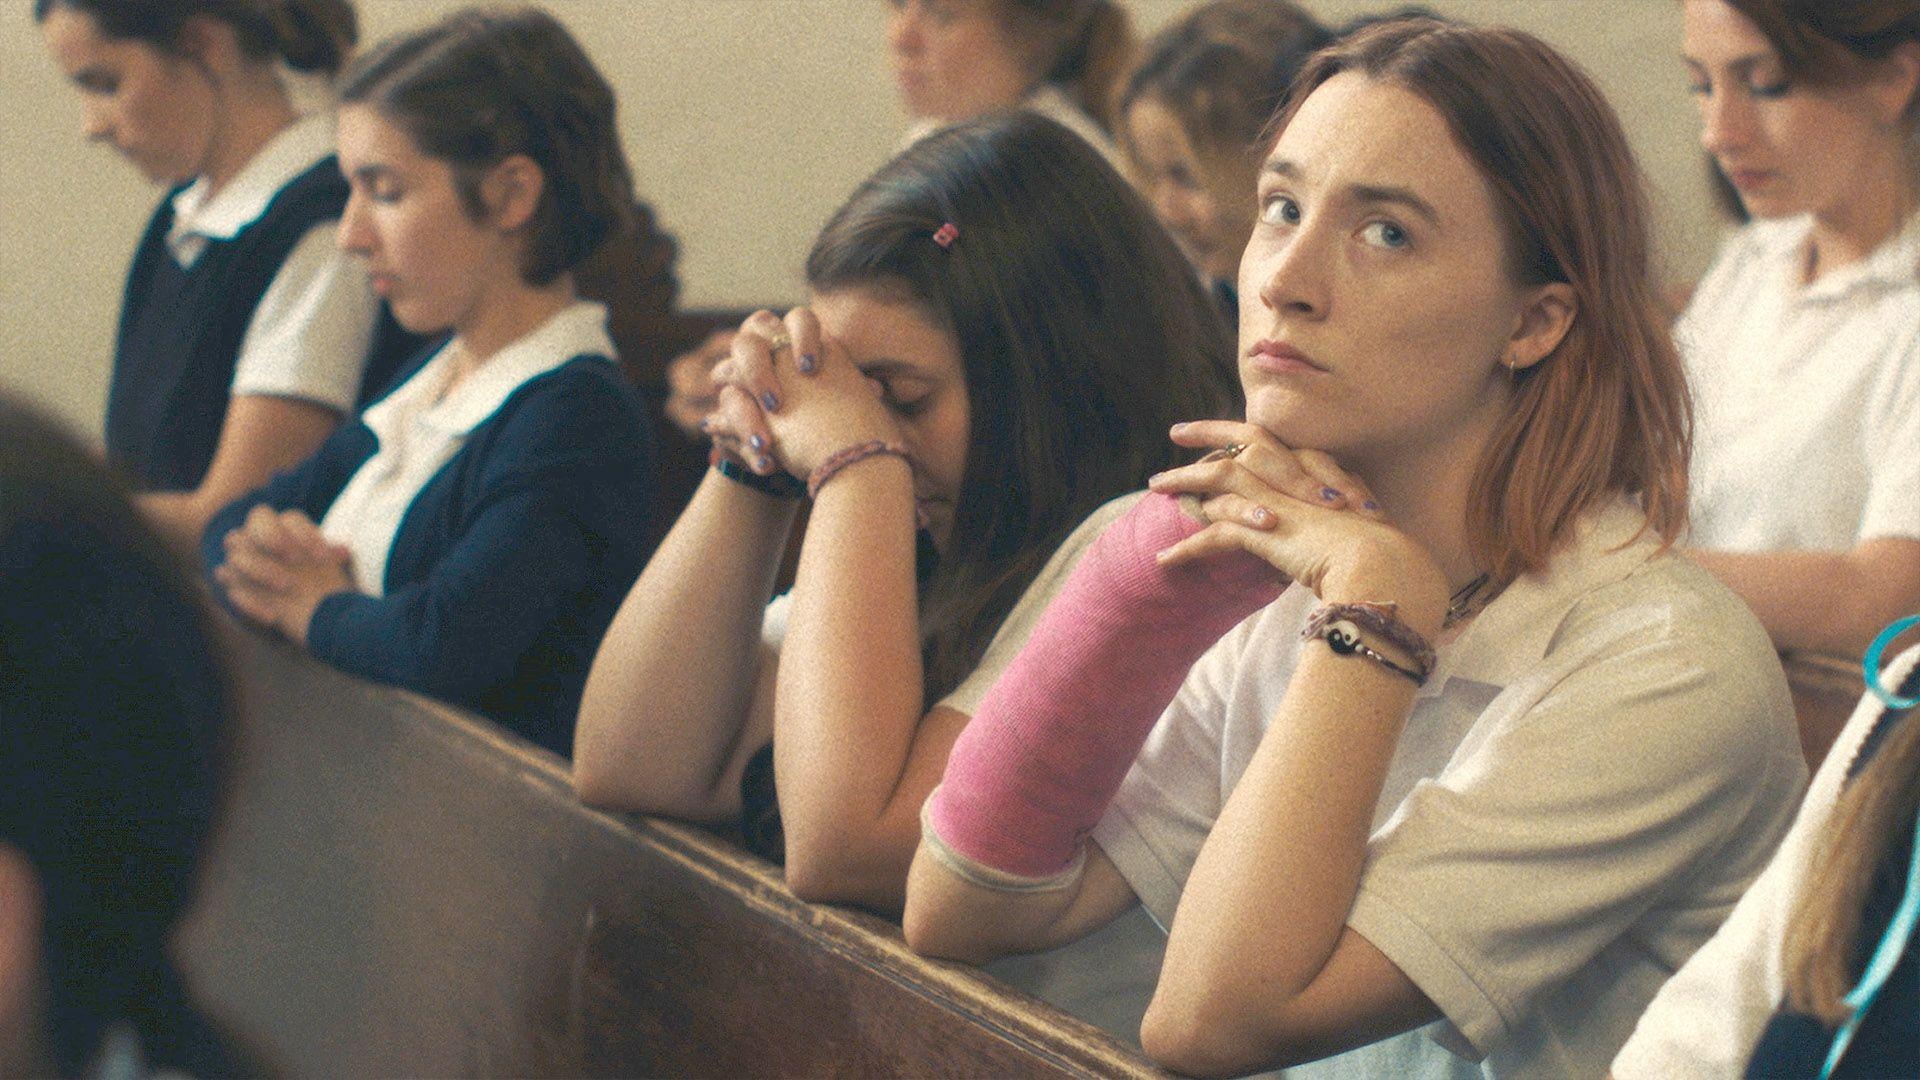 Lady Bird: The film earned five nominations at the 90th Academy Awards. 1920x1080 Full HD Wallpaper.